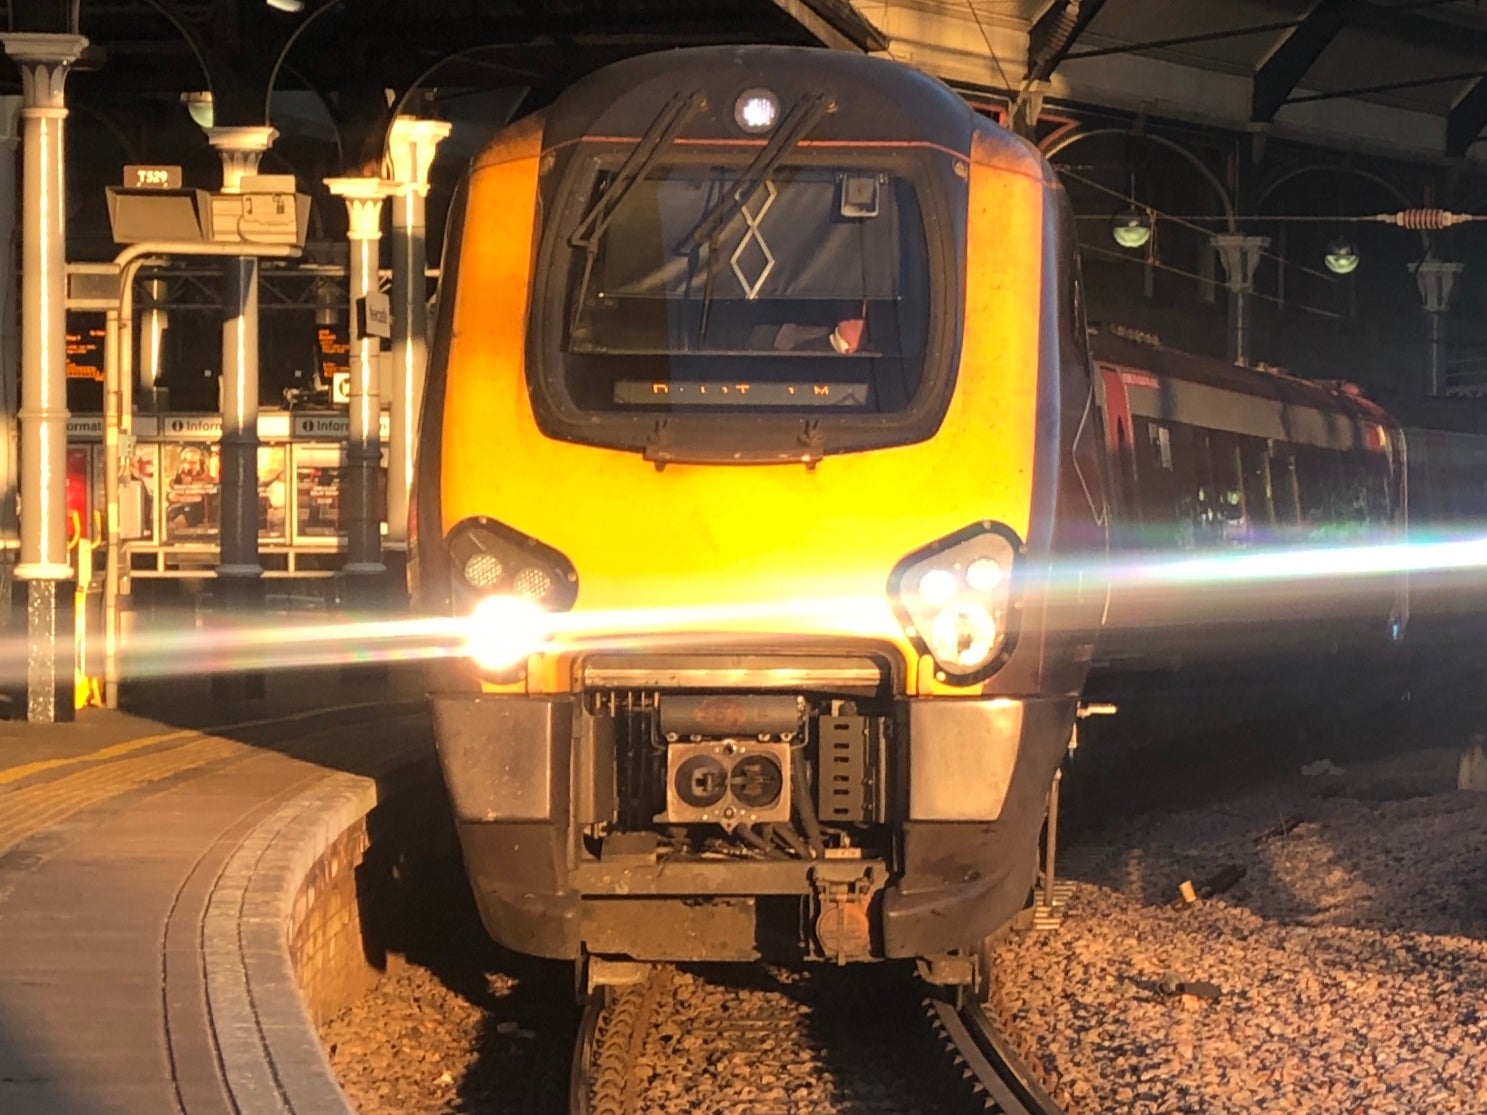 Heading south: a CrossCountry train at Newcastle station